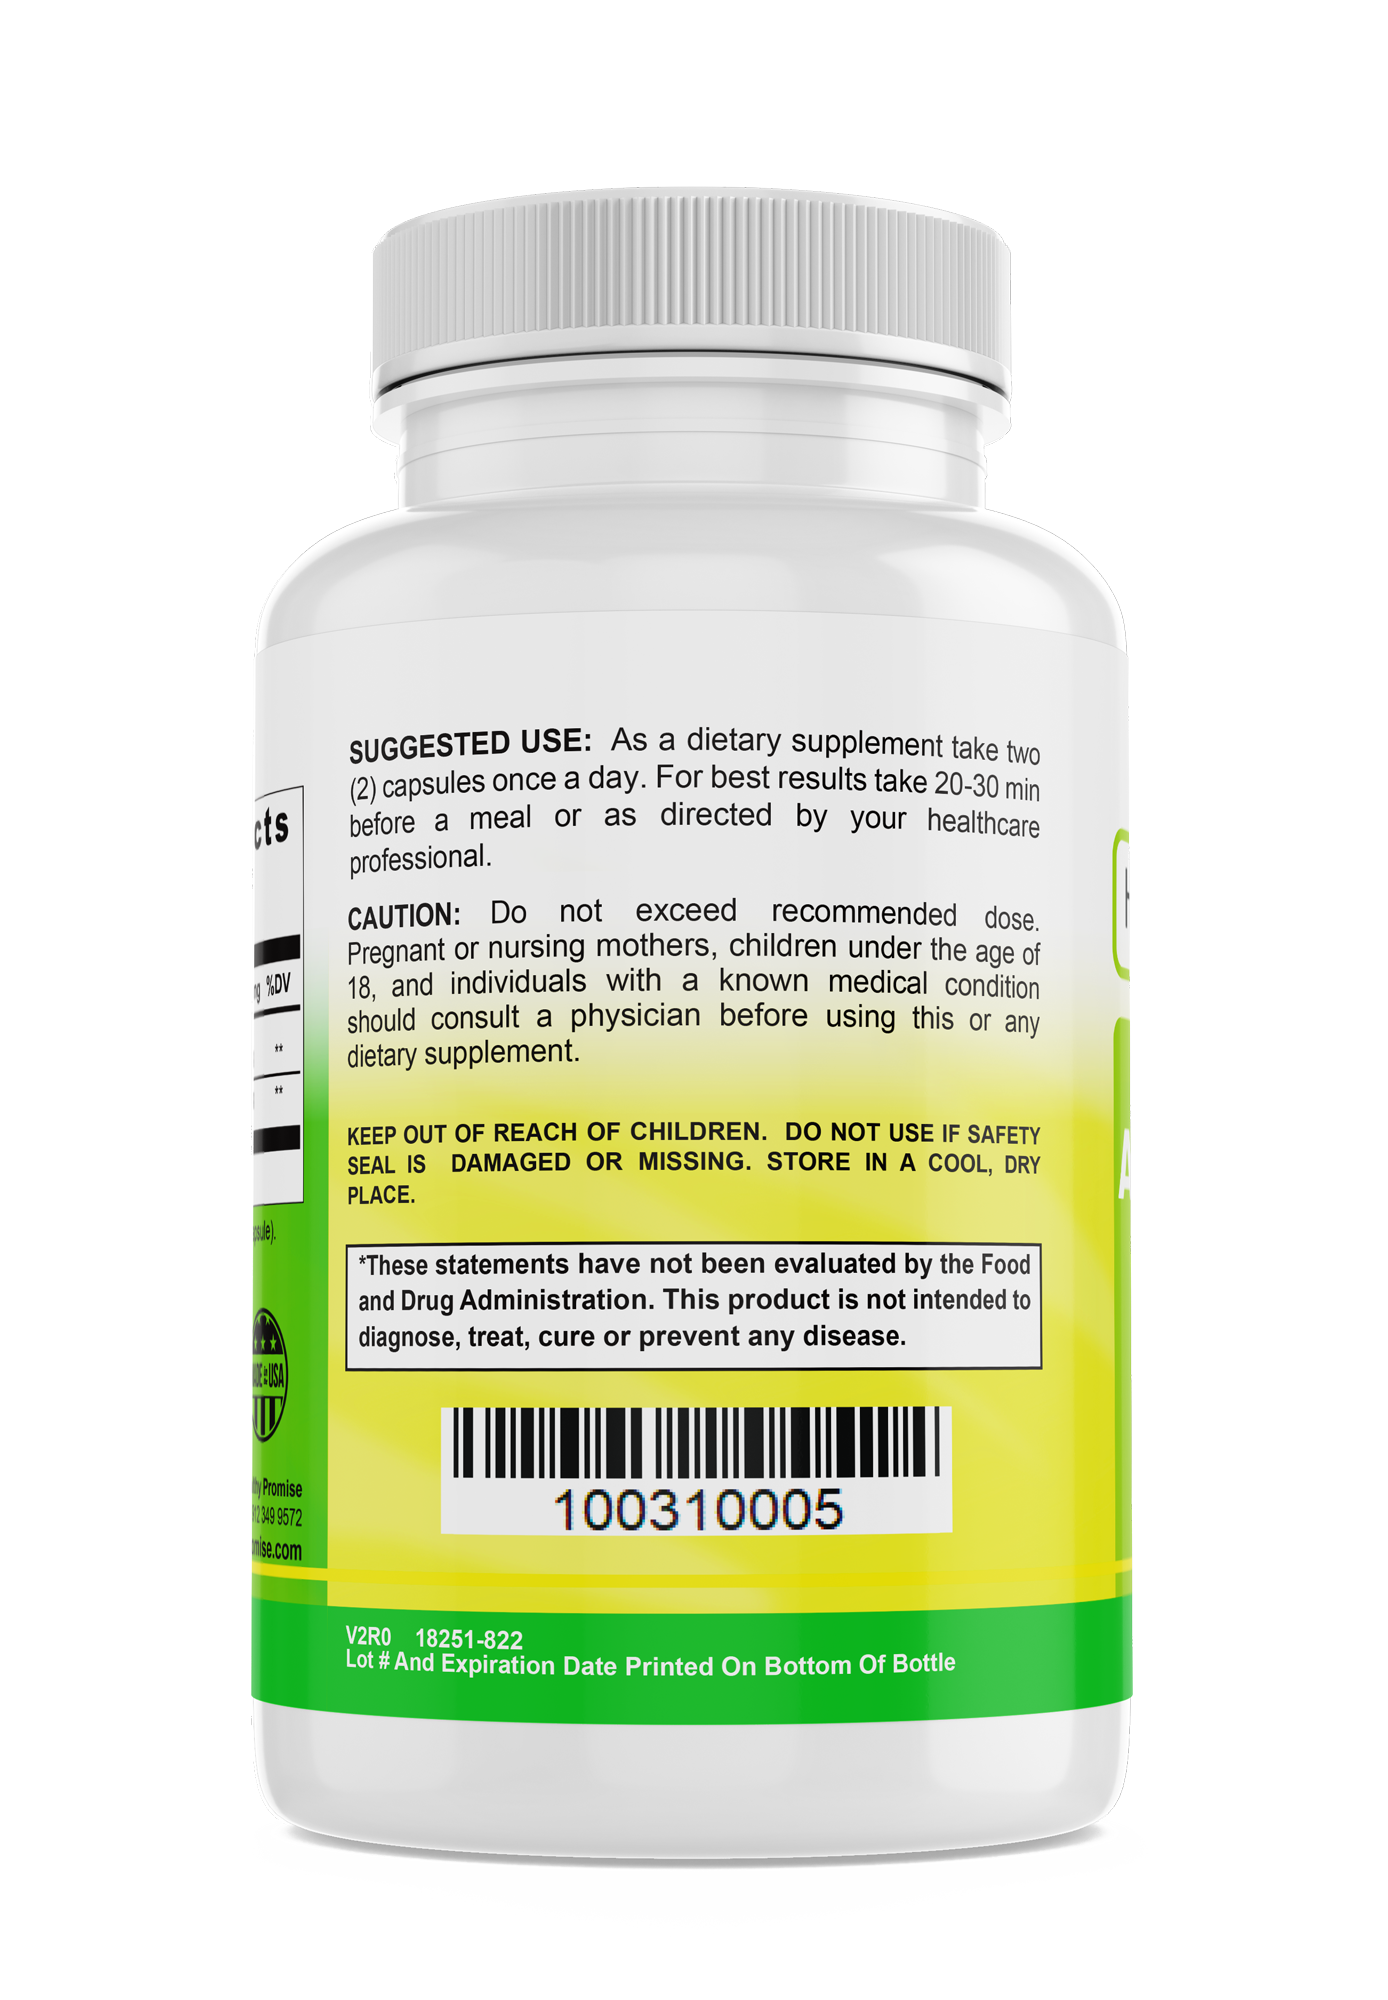 the healthy promise ashwagandha dietary vitamin supplement bottle suggested use